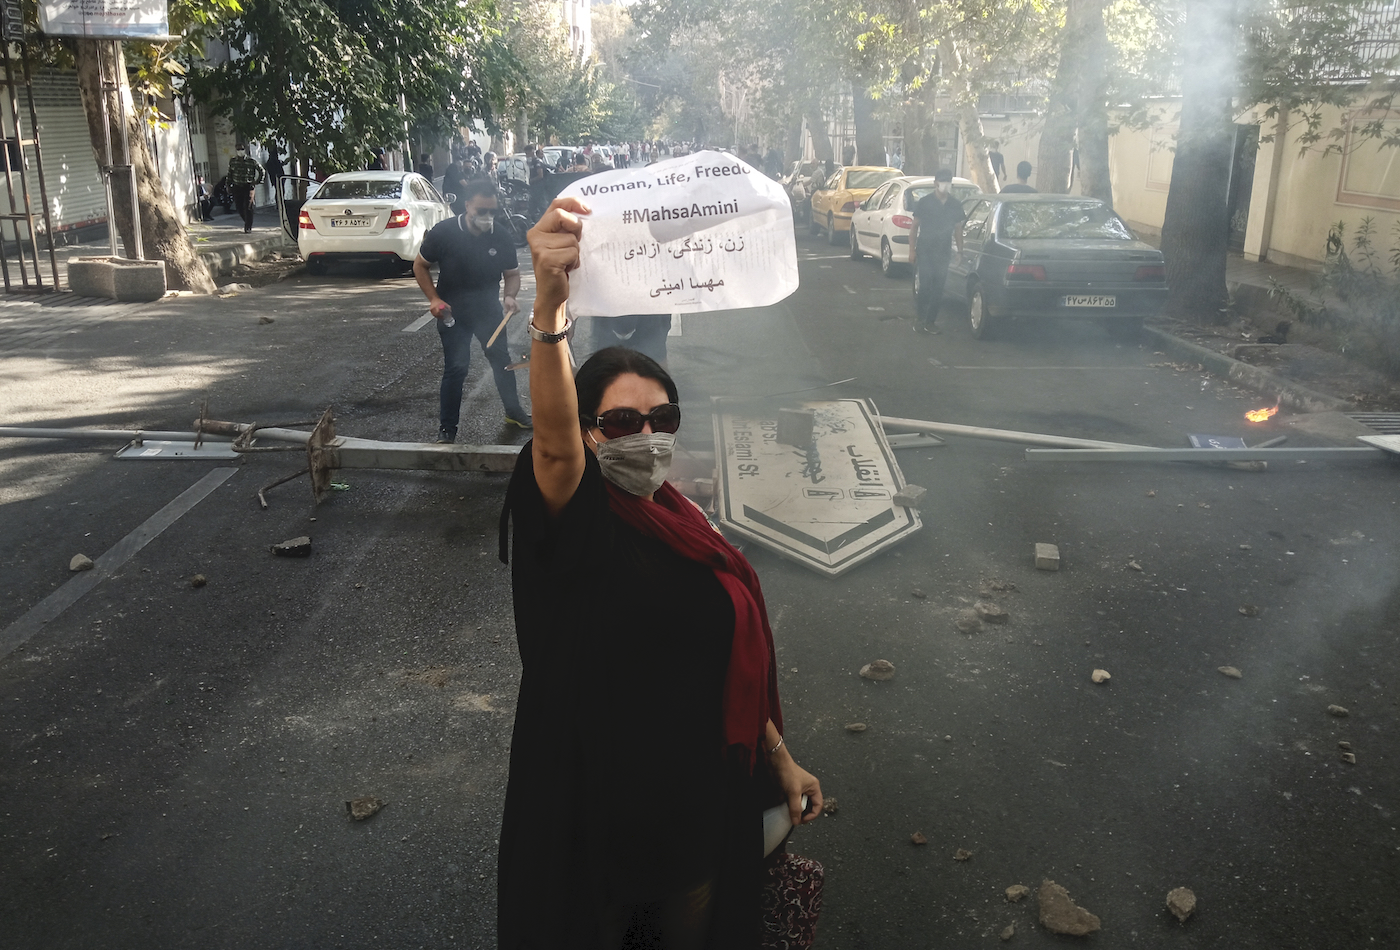 A woman protesting on the streets of Iran holds up a sign that says "Women, Life, Freedom."